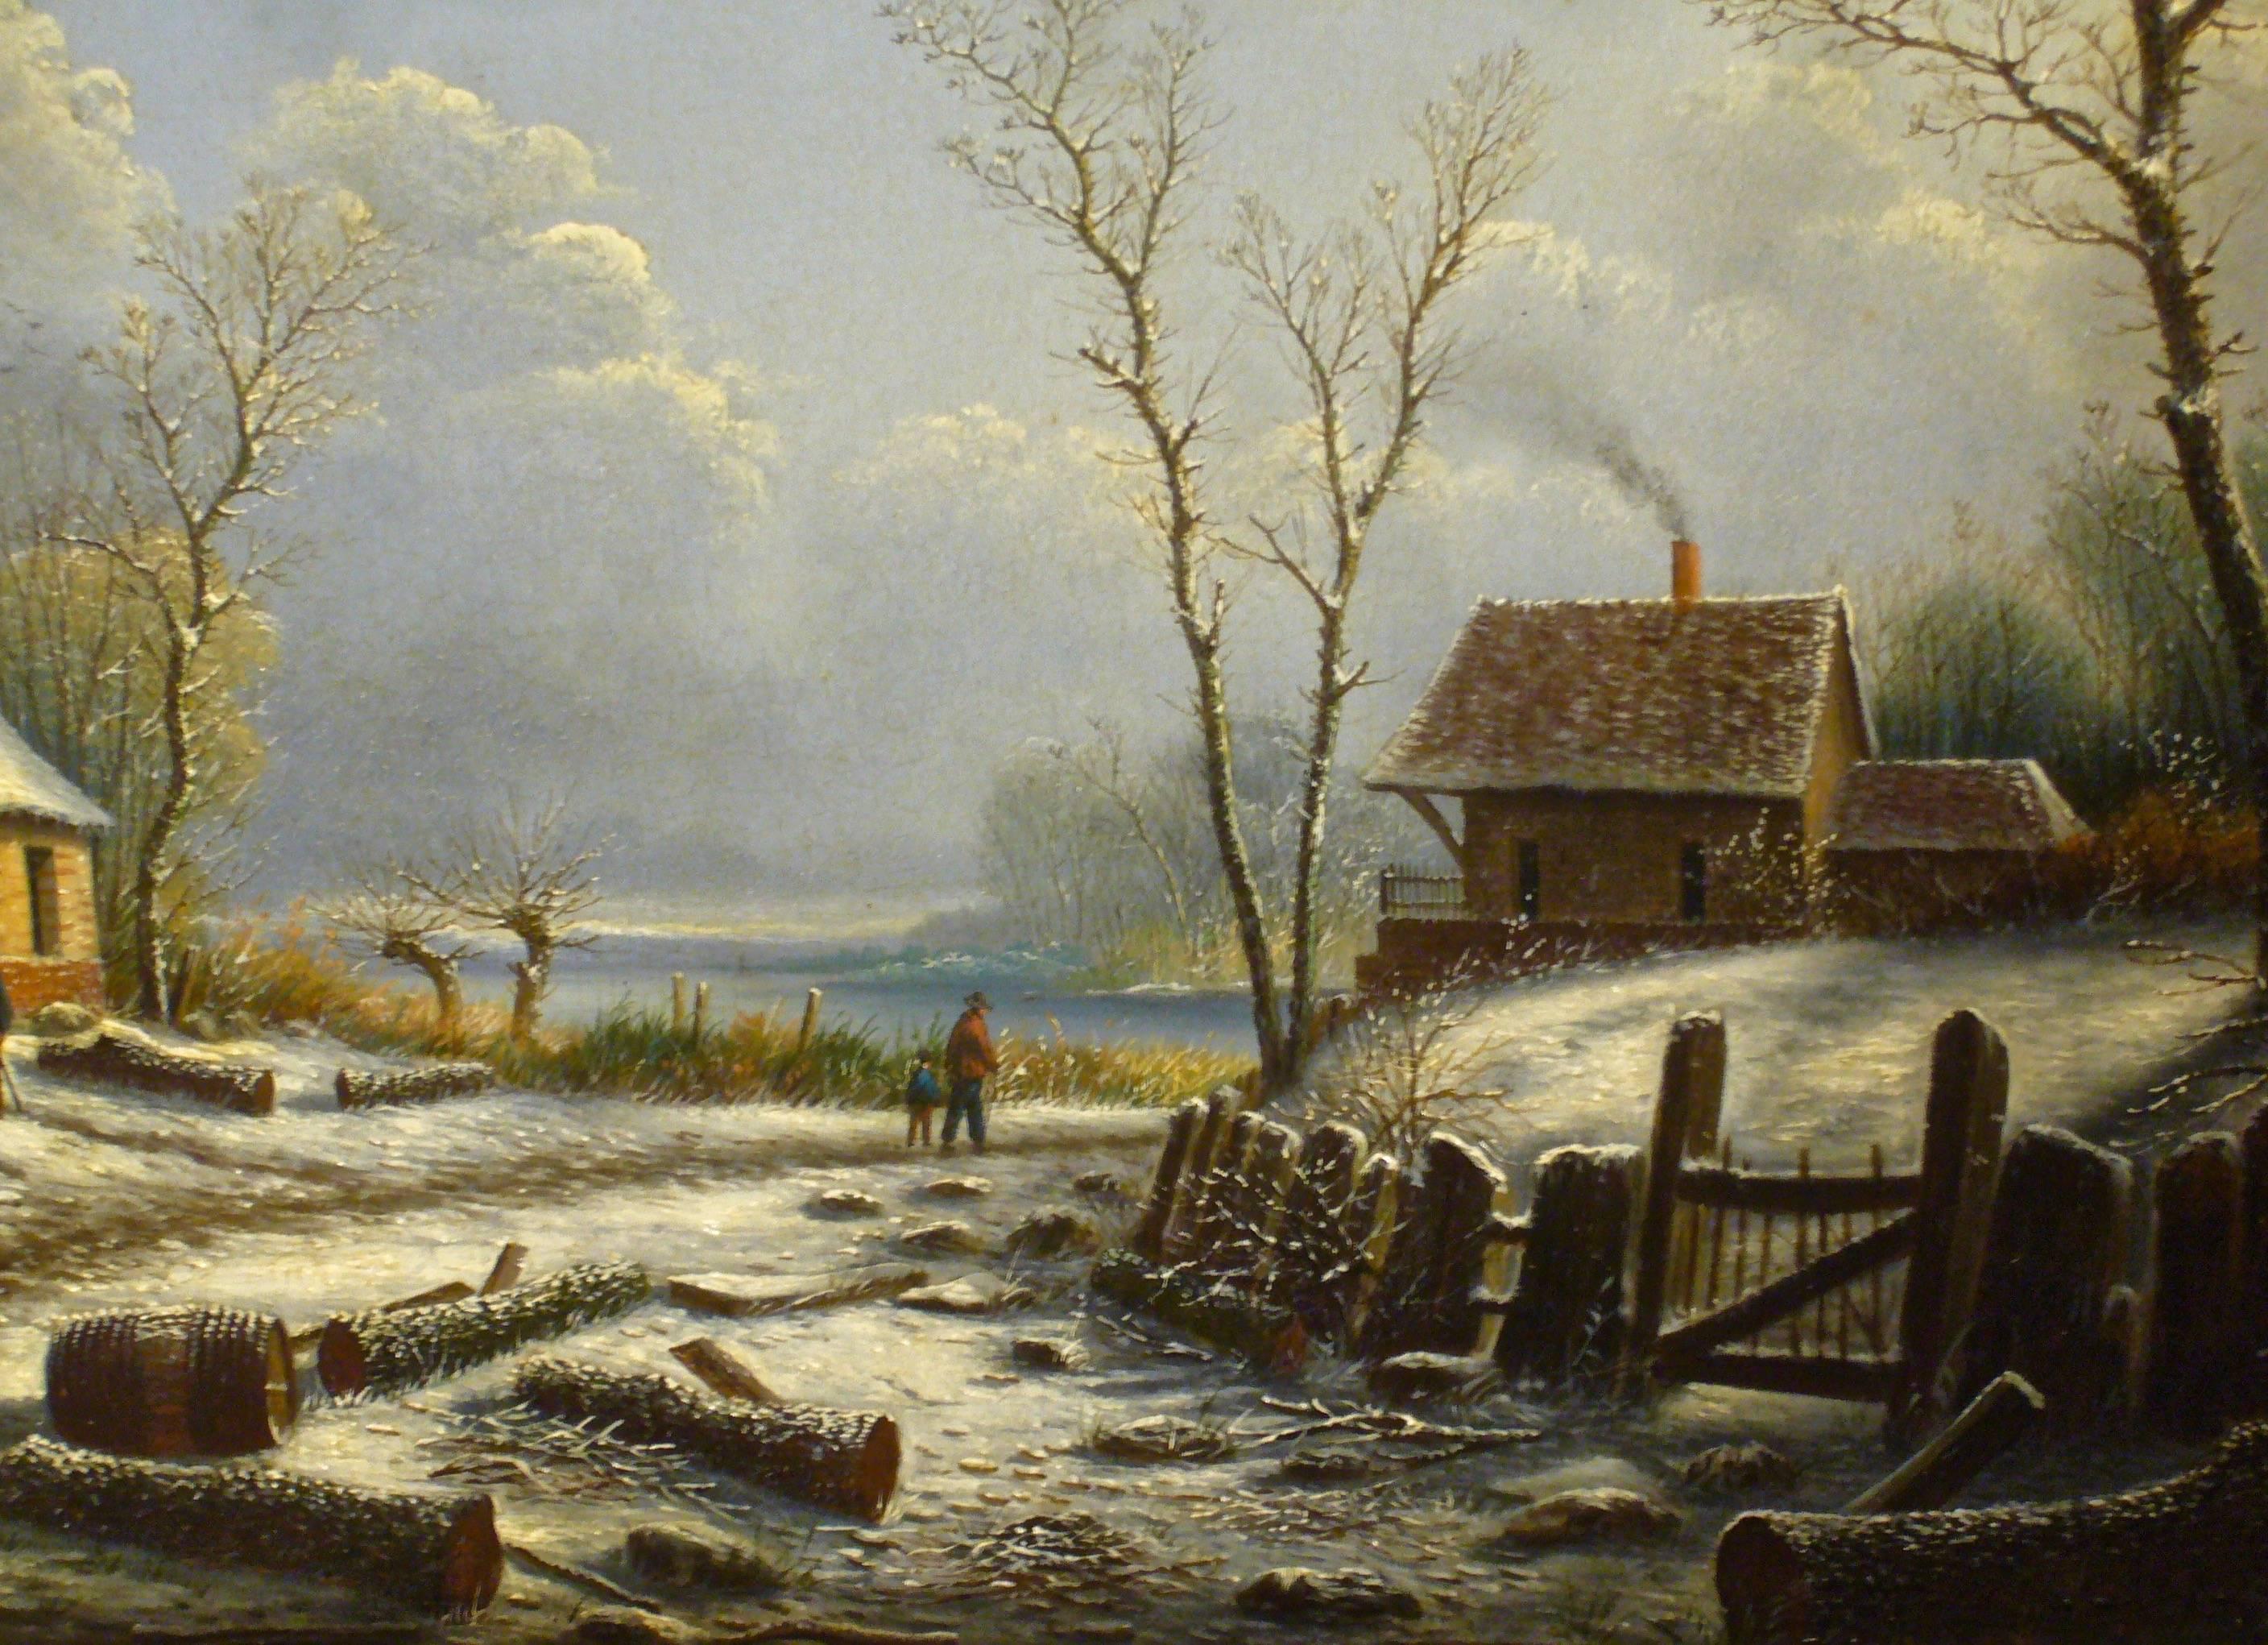 "Village paysage enneigé en hiver" ("Snowy Village Landscape in Winter")
Albert Alexandre Lenoir (1801-1891)

Original Antique Old Master Oil Painting, oil on chamfered wooden panel, c. 1845

A pristine oil painting, rendered by